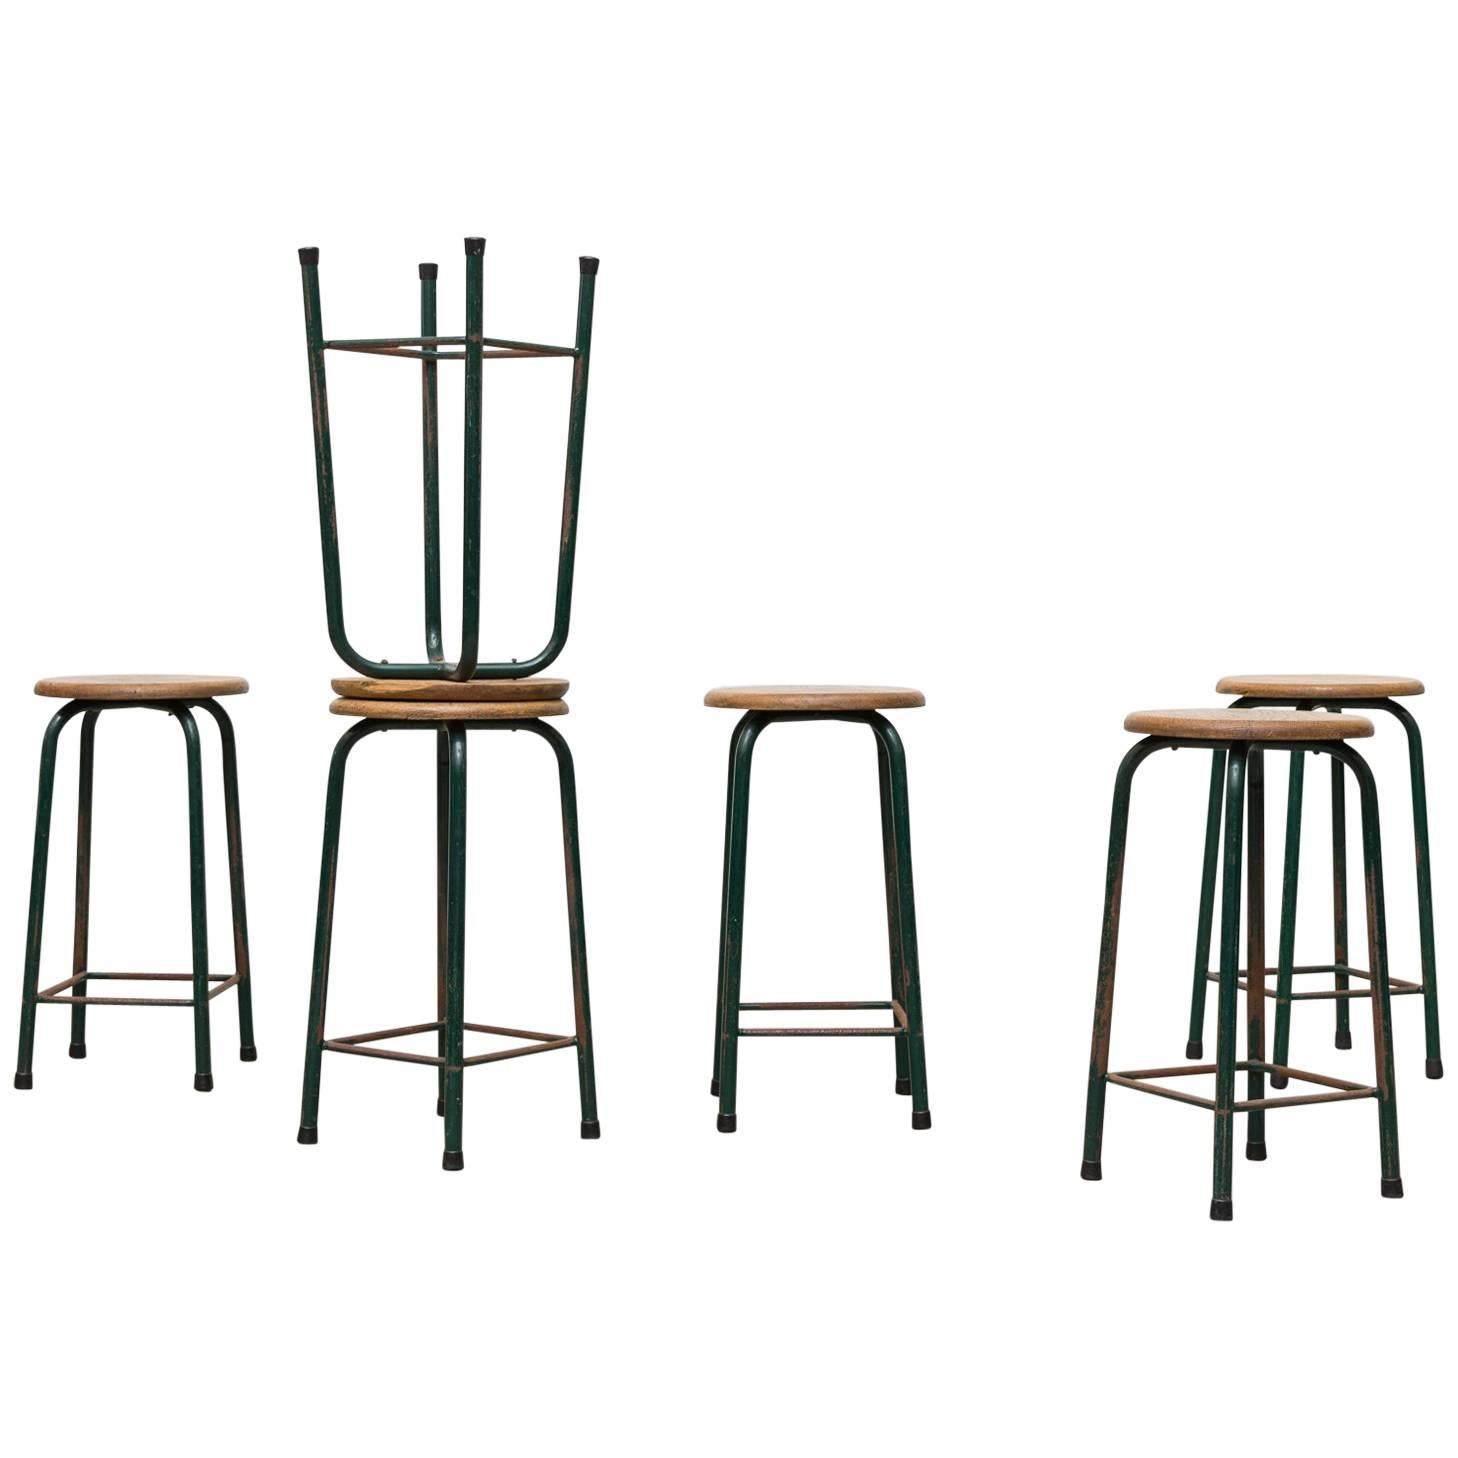 Set of Six Industrial Science Lab Stools